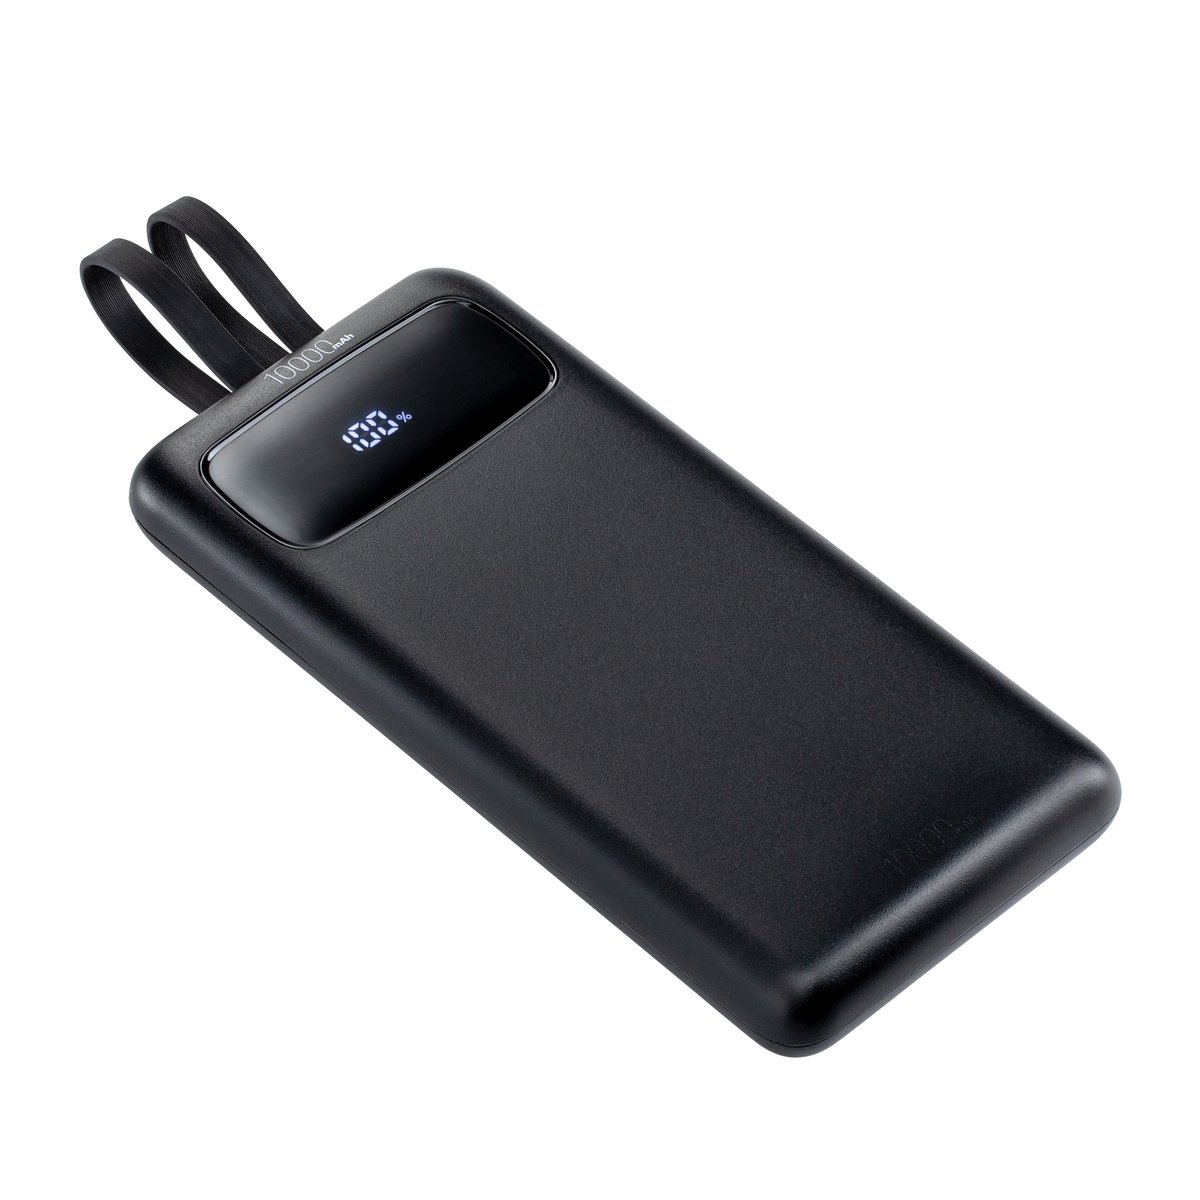 Powerbank with Fast Charge and Power Delivery REEVES-PULSEXPRESS 10 black 10000 mAh